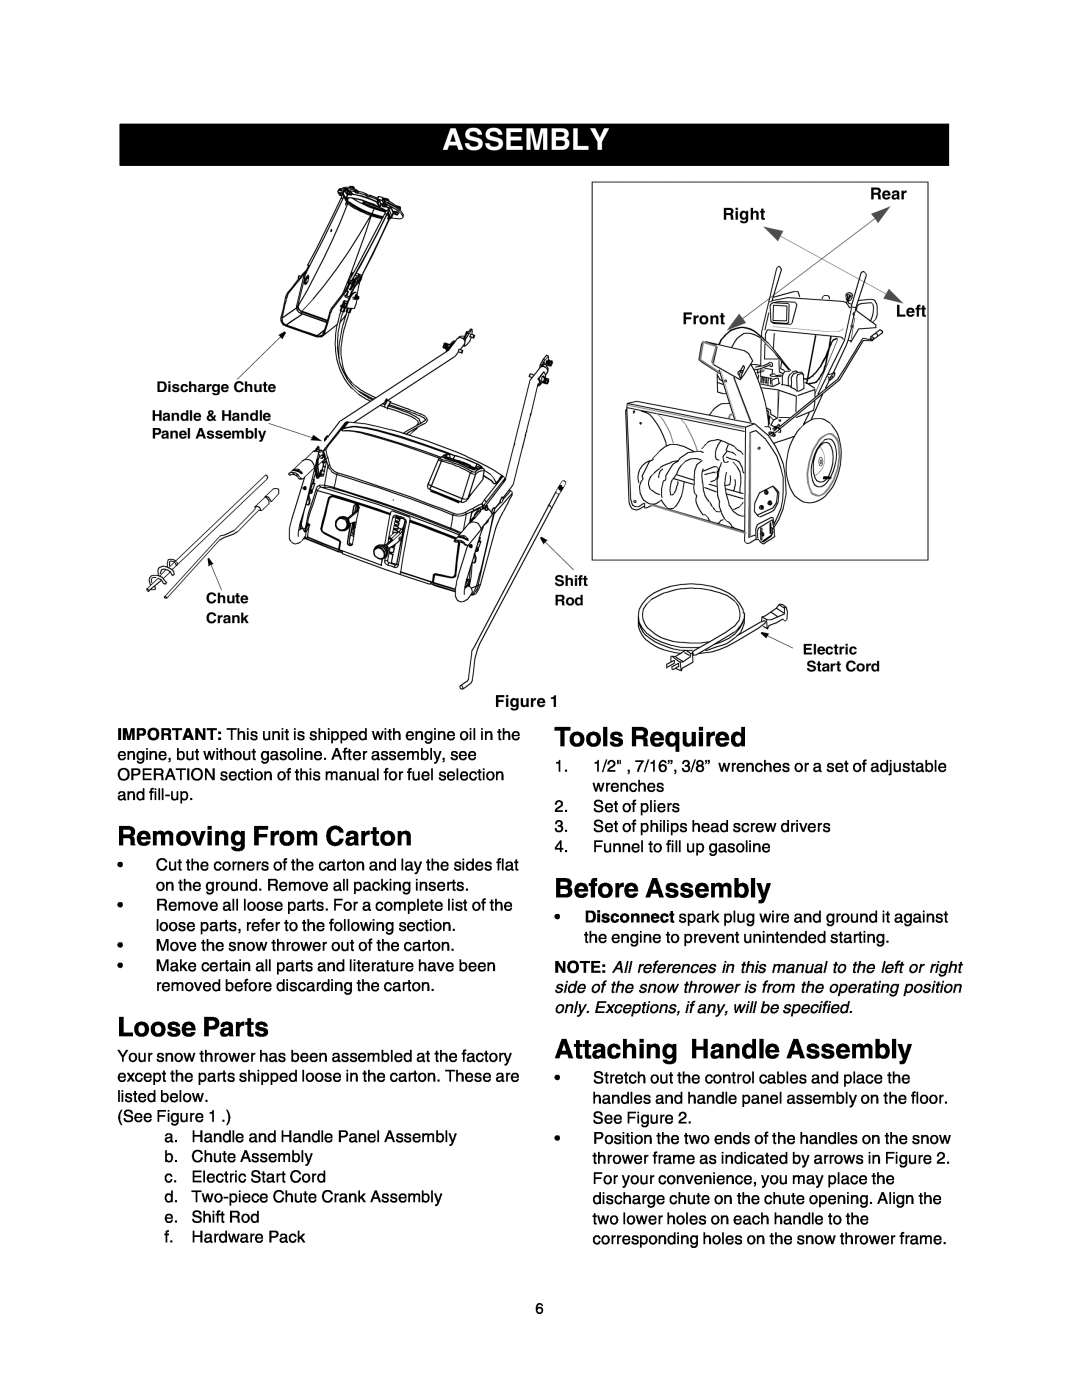 Sears 247.88853 Removing From Carton, Tools Required, Before Assembly, Loose Parts, Attaching Handle Assembly 